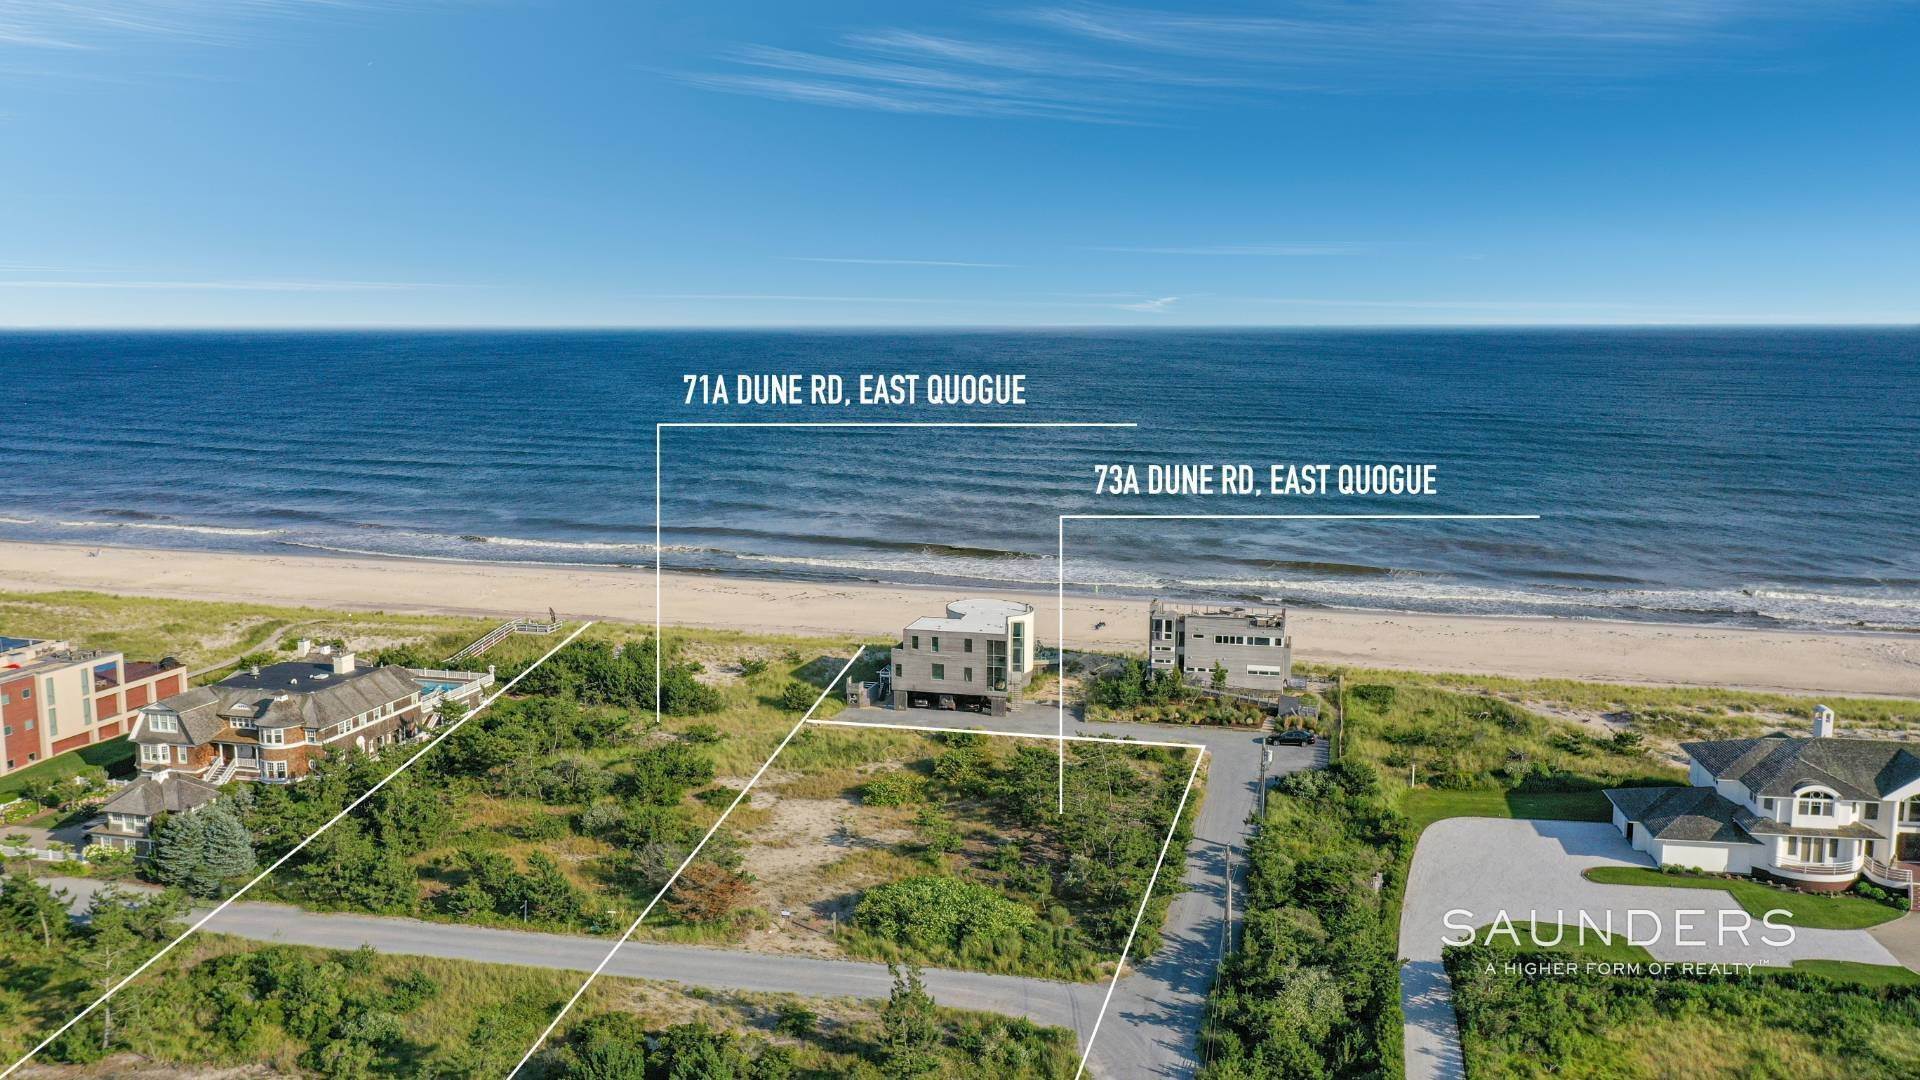 Single Family Homes for Sale at Dune Road Development Opportunity 73a Dune Road, East Quogue, NY 11942